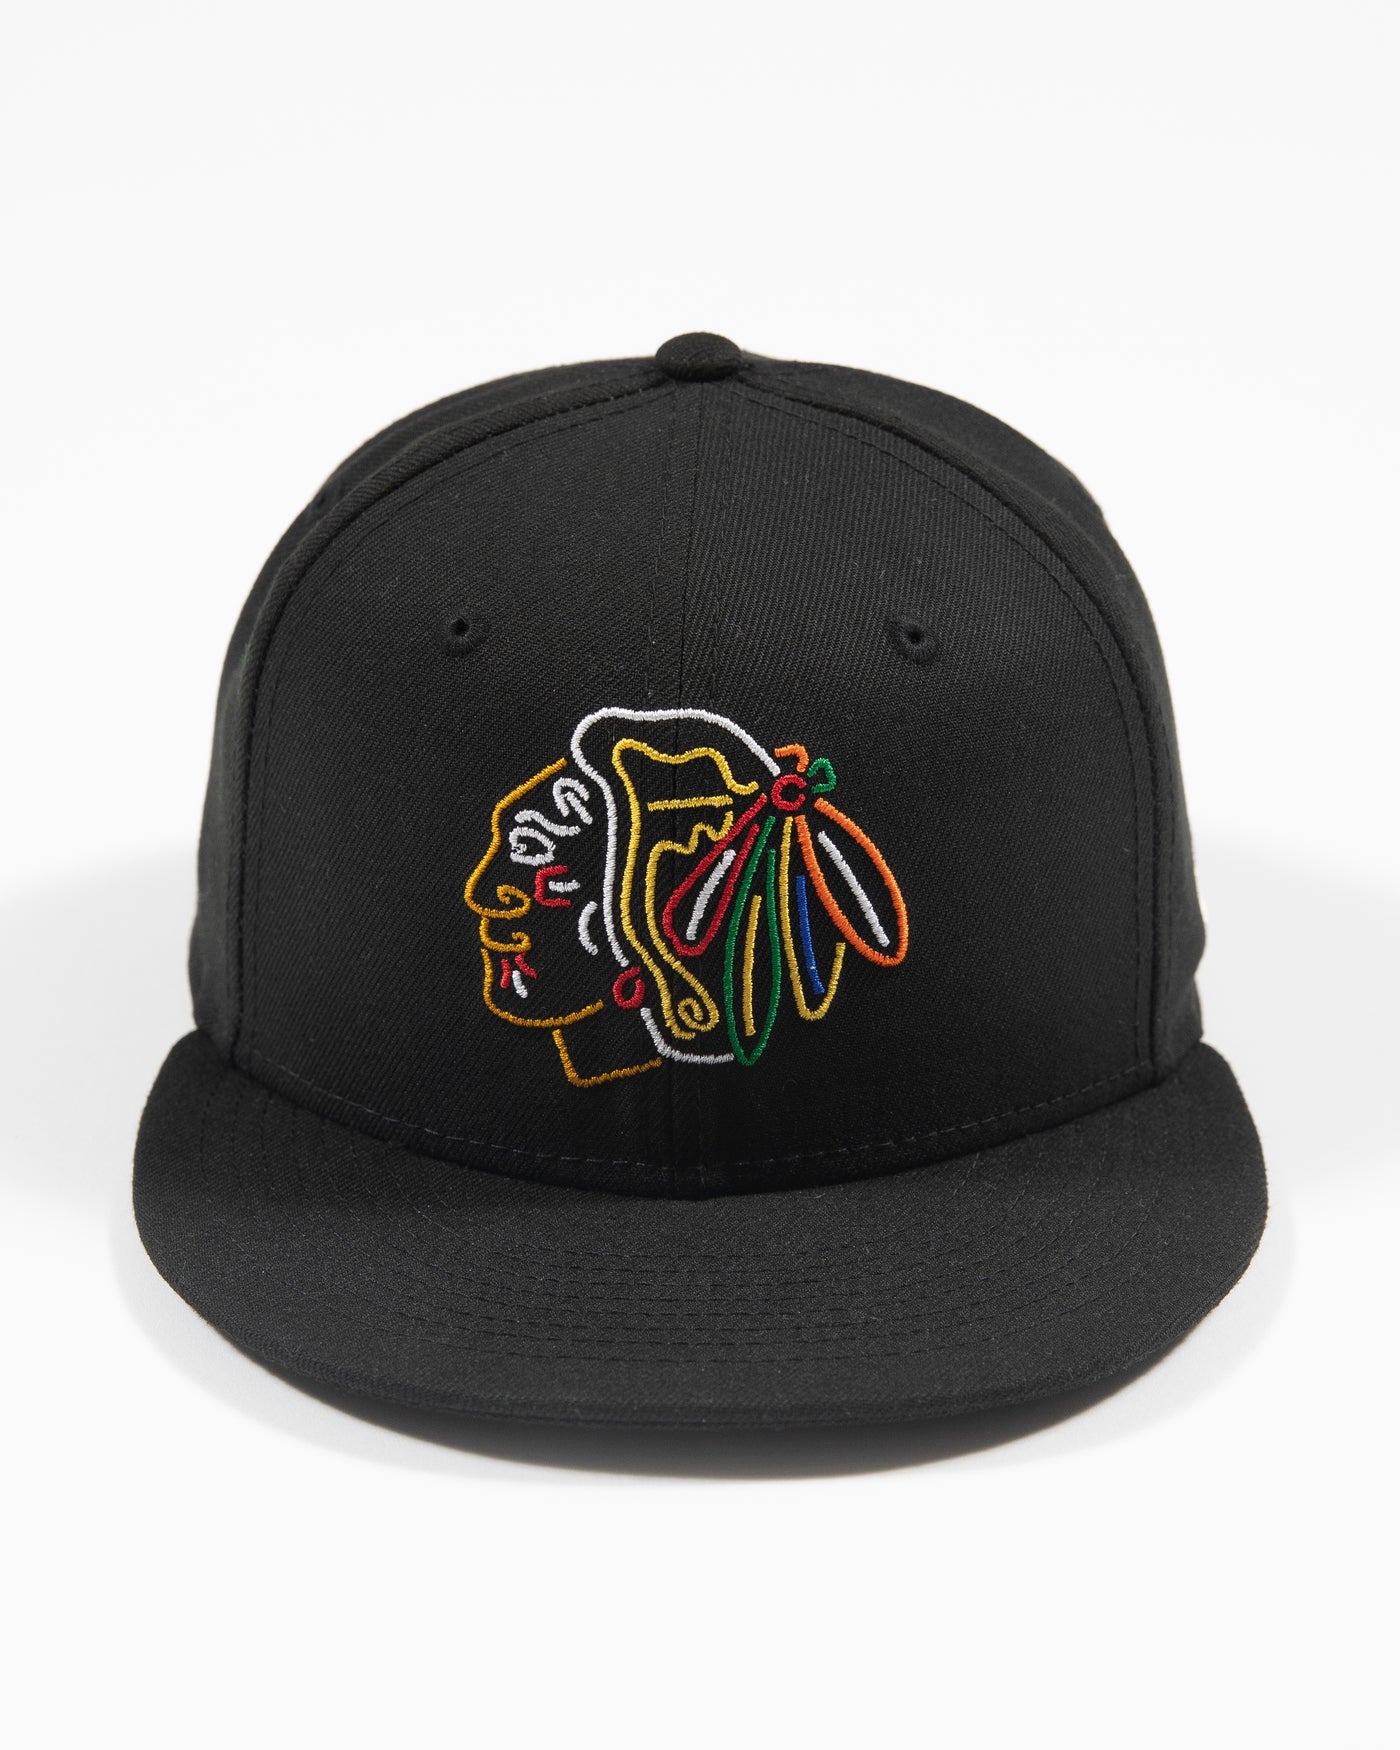 New Era black fitted hat with neon lights inspired primary logo - front view